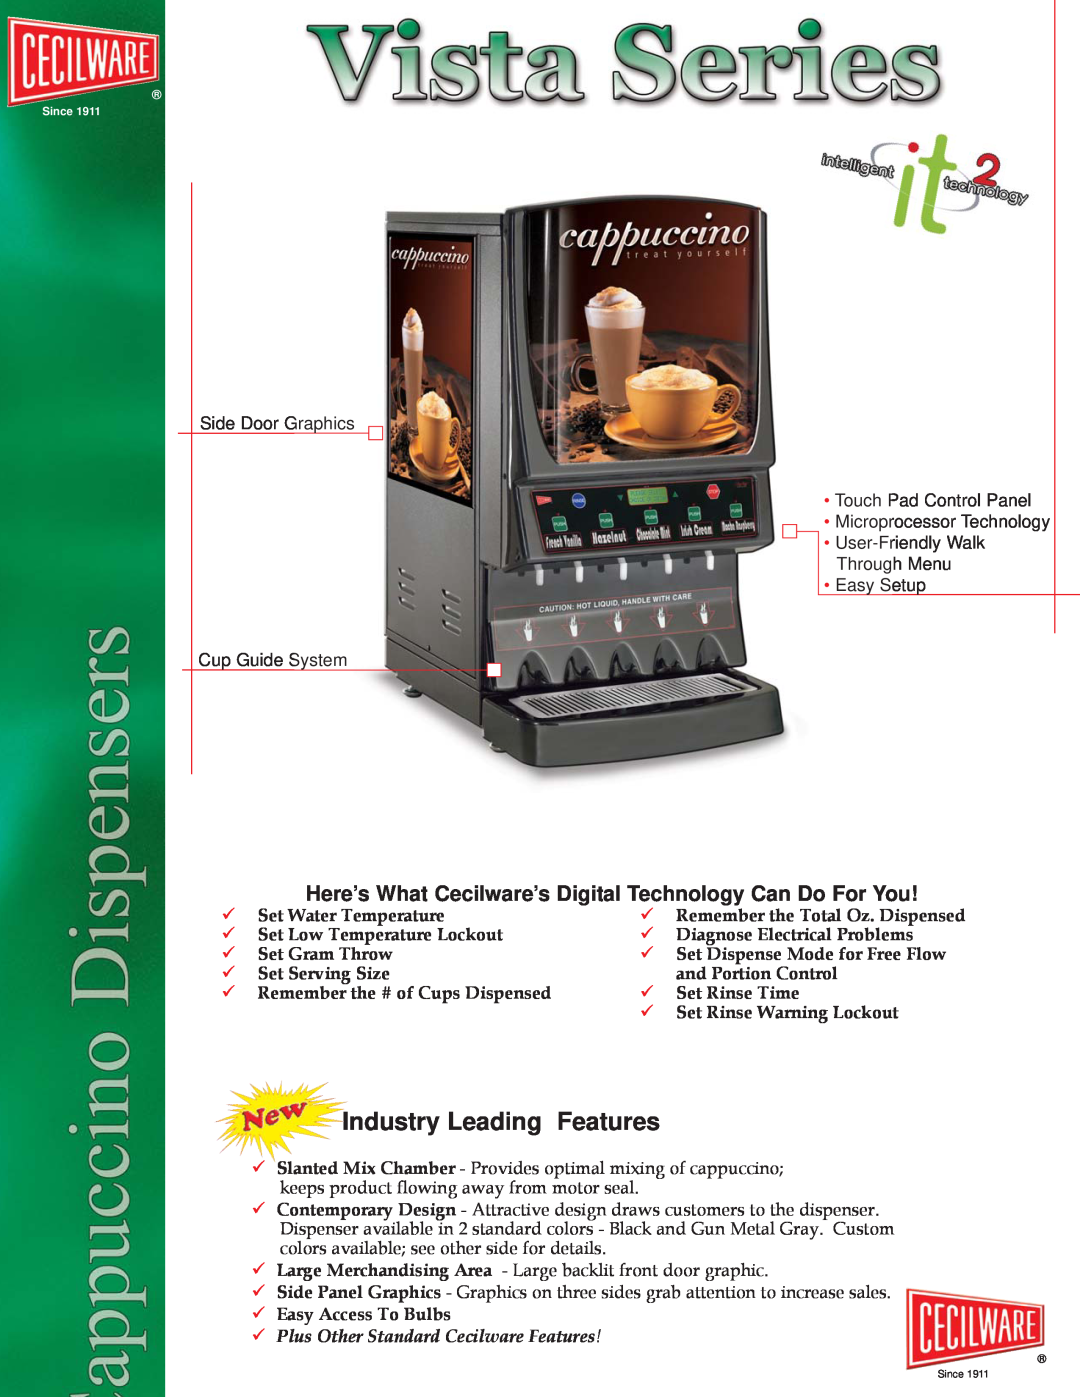 Cecilware Vista Series manual Industry Leading Features, Side Door Graphics Touch Pad Control Panel 